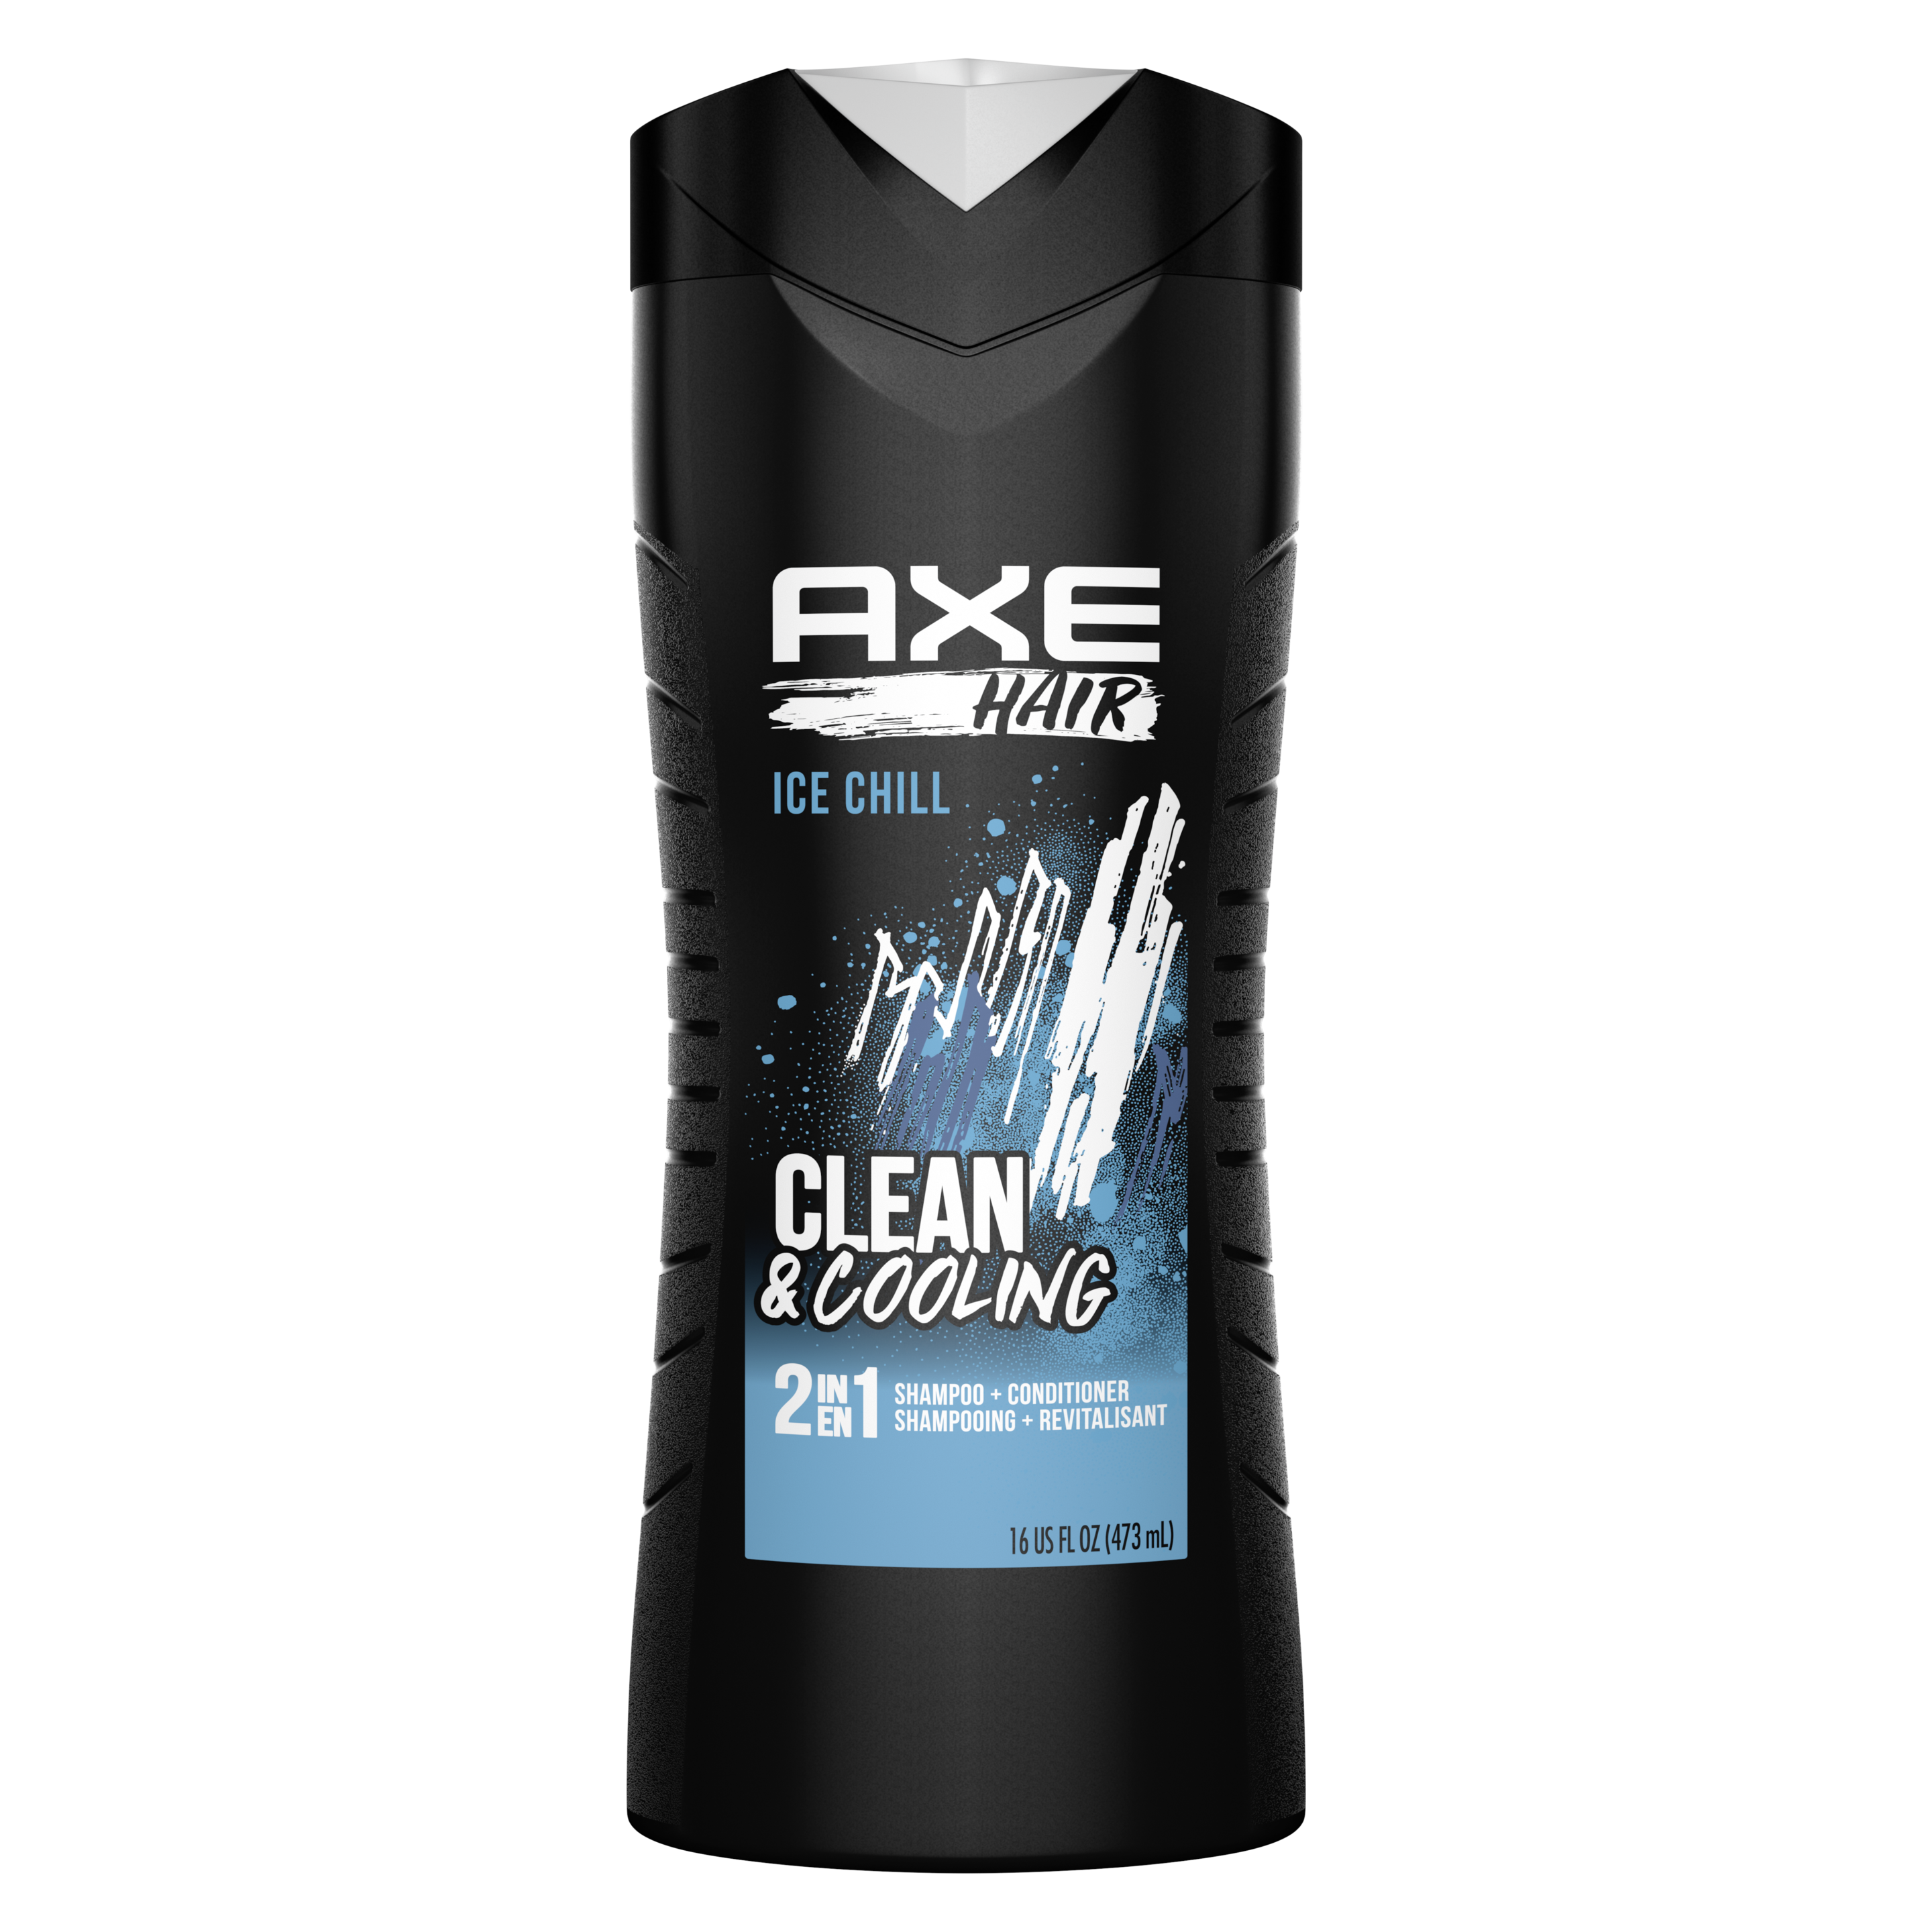 AXE Hair Ice Chill 2-in-1 Shampoo and Conditioner